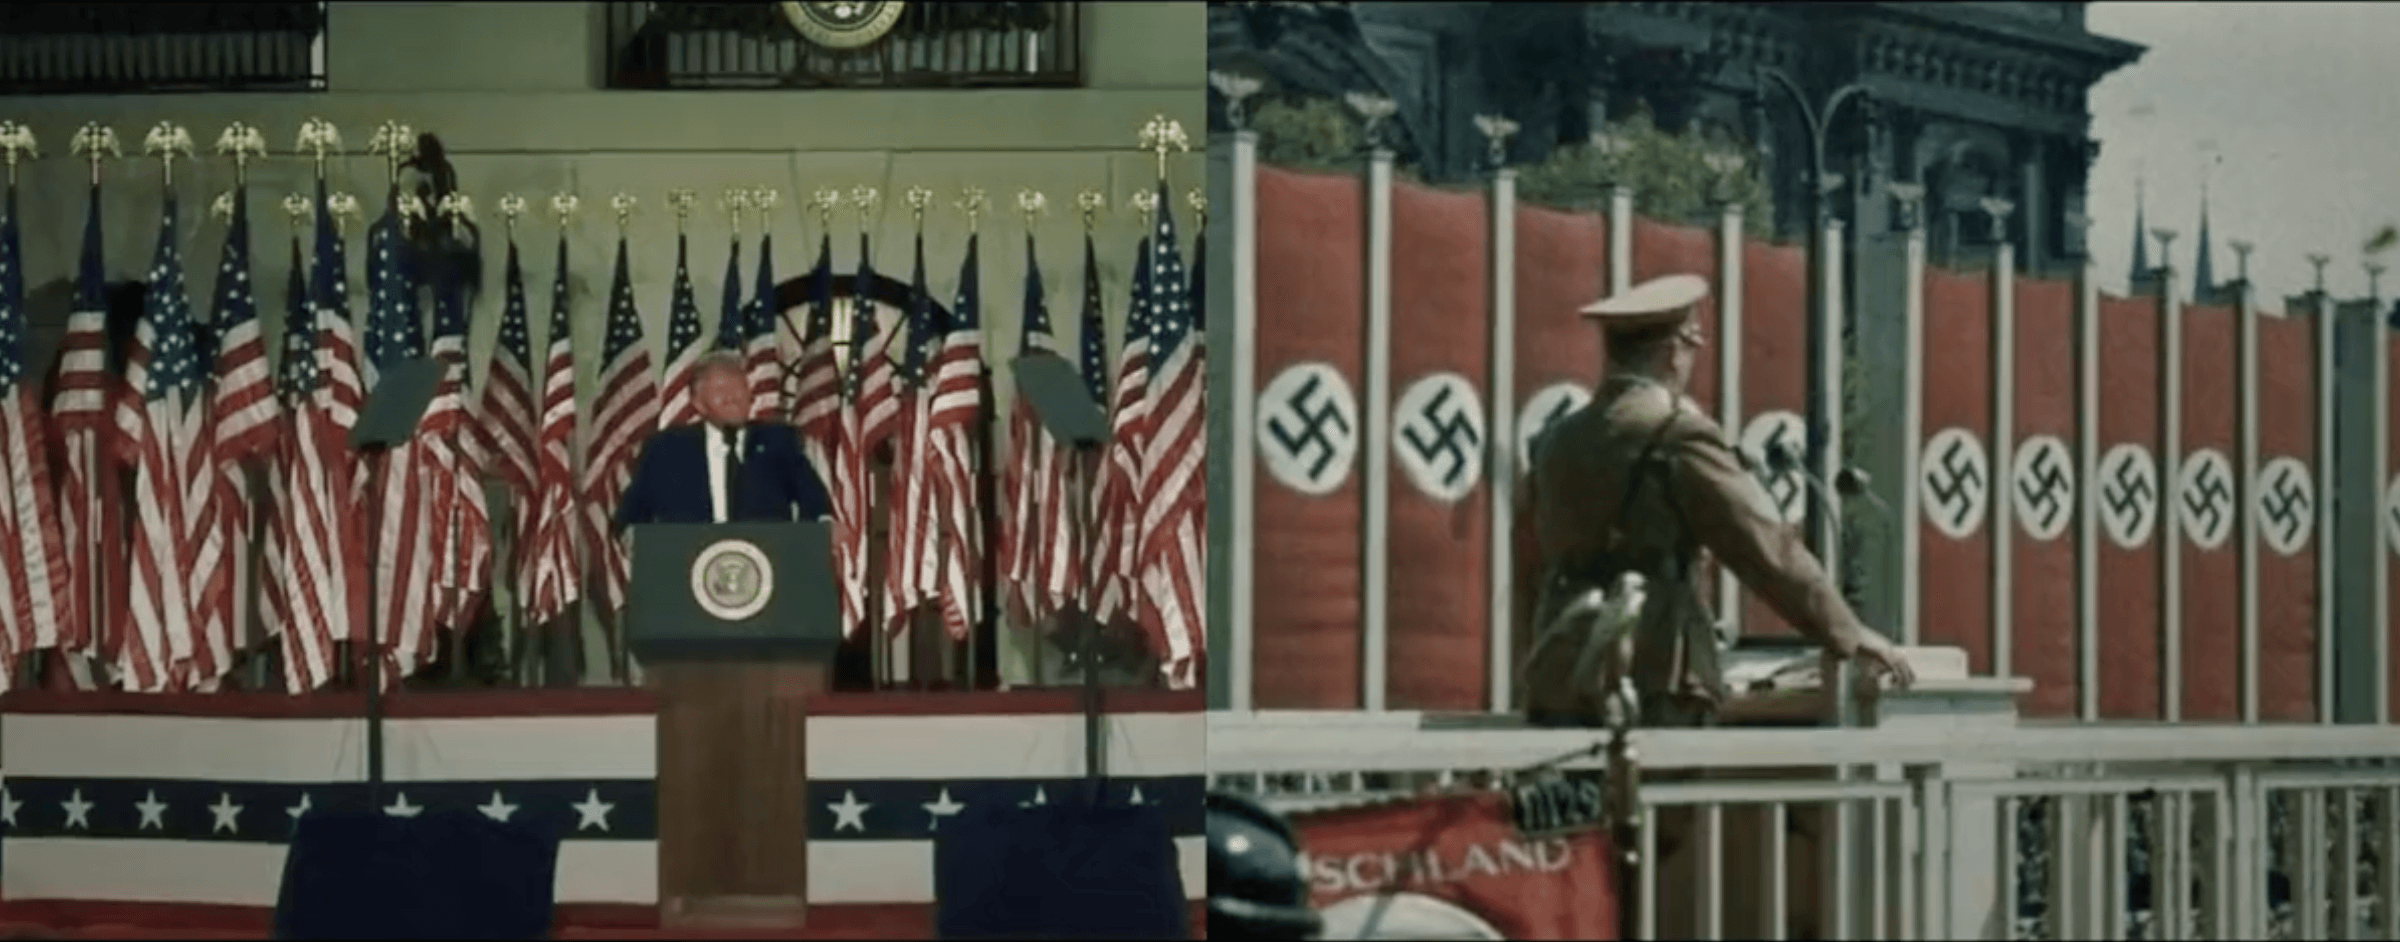 A still from a new advertisement by the Jewish Democratic Council of America juxtaposes Republicans, including President Donald Trump, with images from Nazi Germany.